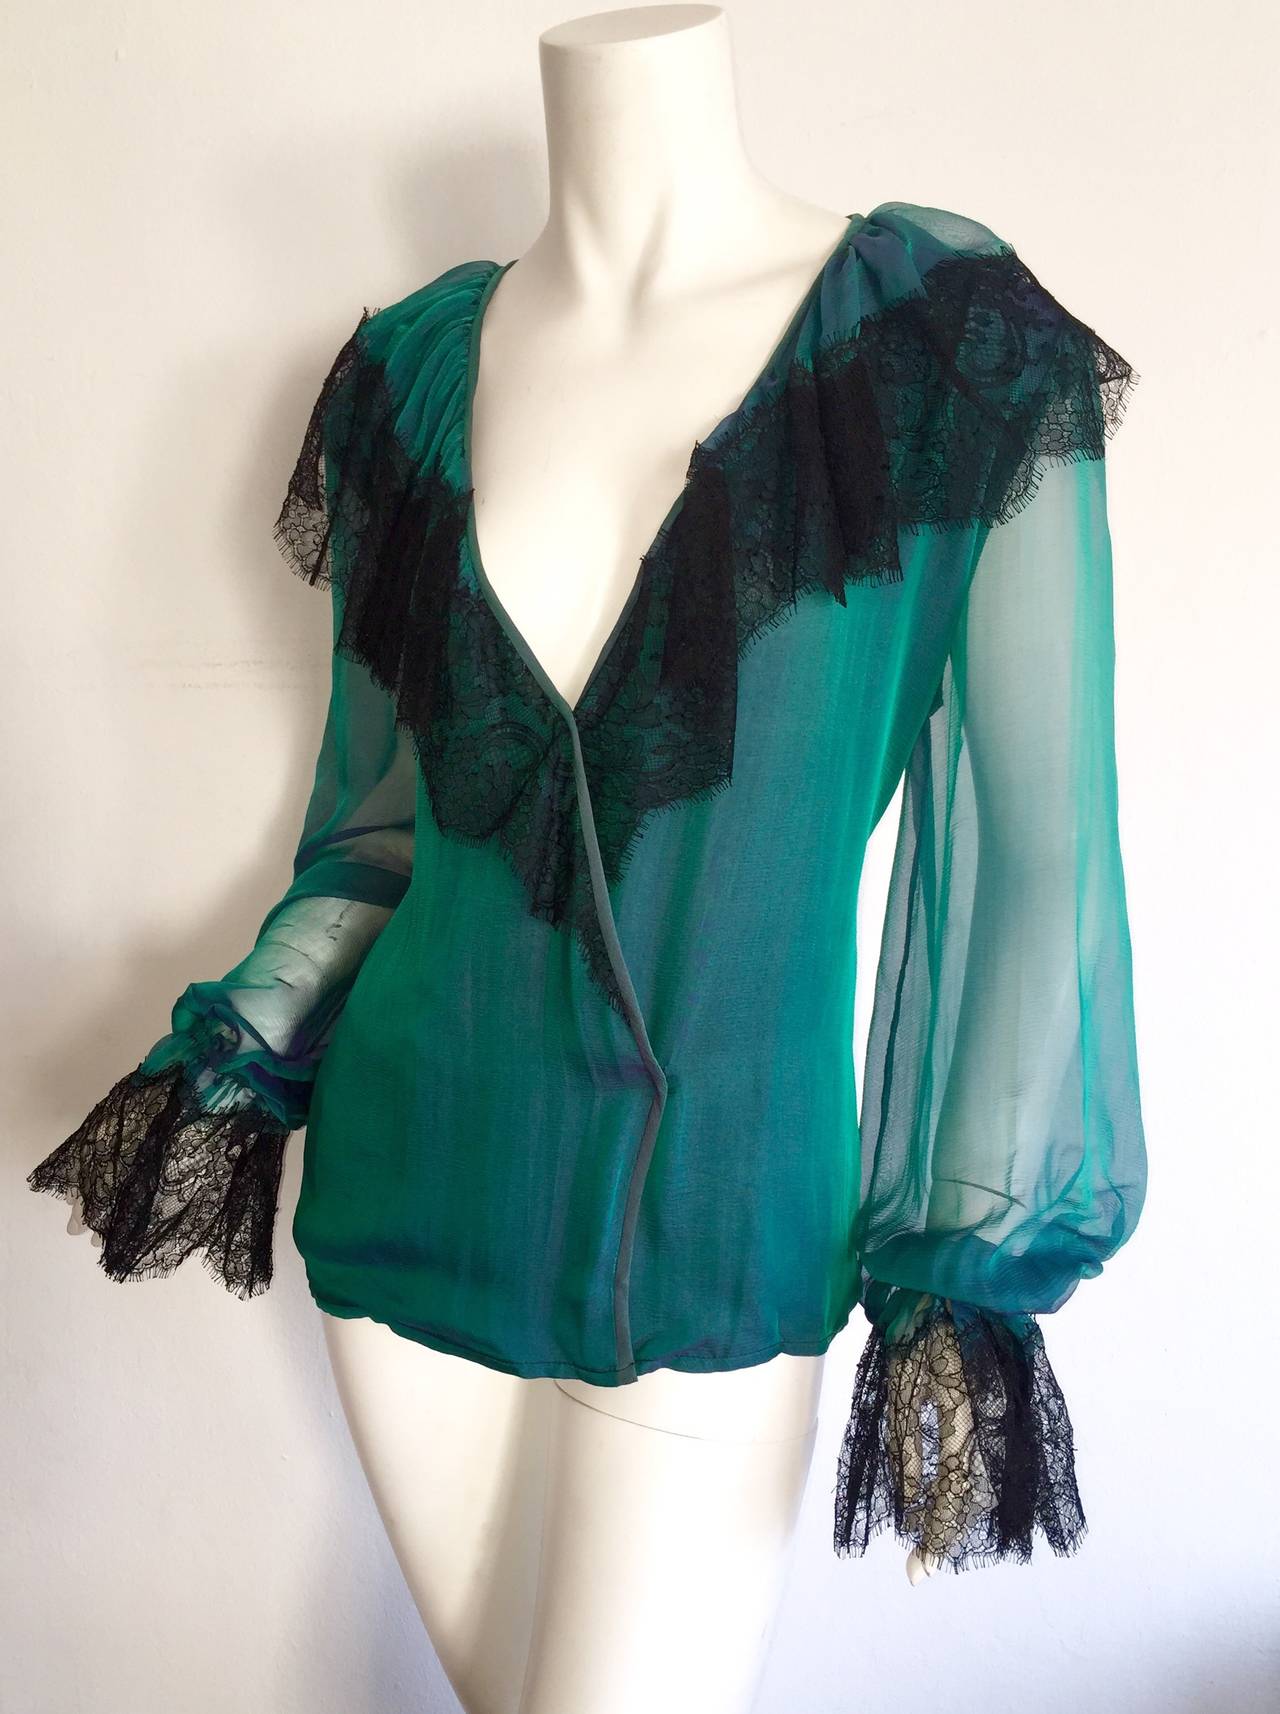 Stunning vintage Liancarlo silk blouse! Wonderful faux-wrap style, with black  French lace accents at collar and cuffs. Billow poet's sleeves. Looks great with jeans, or tucked into a skirt, or trousers. Bodice fully lined, with semi-sheer sleeves.